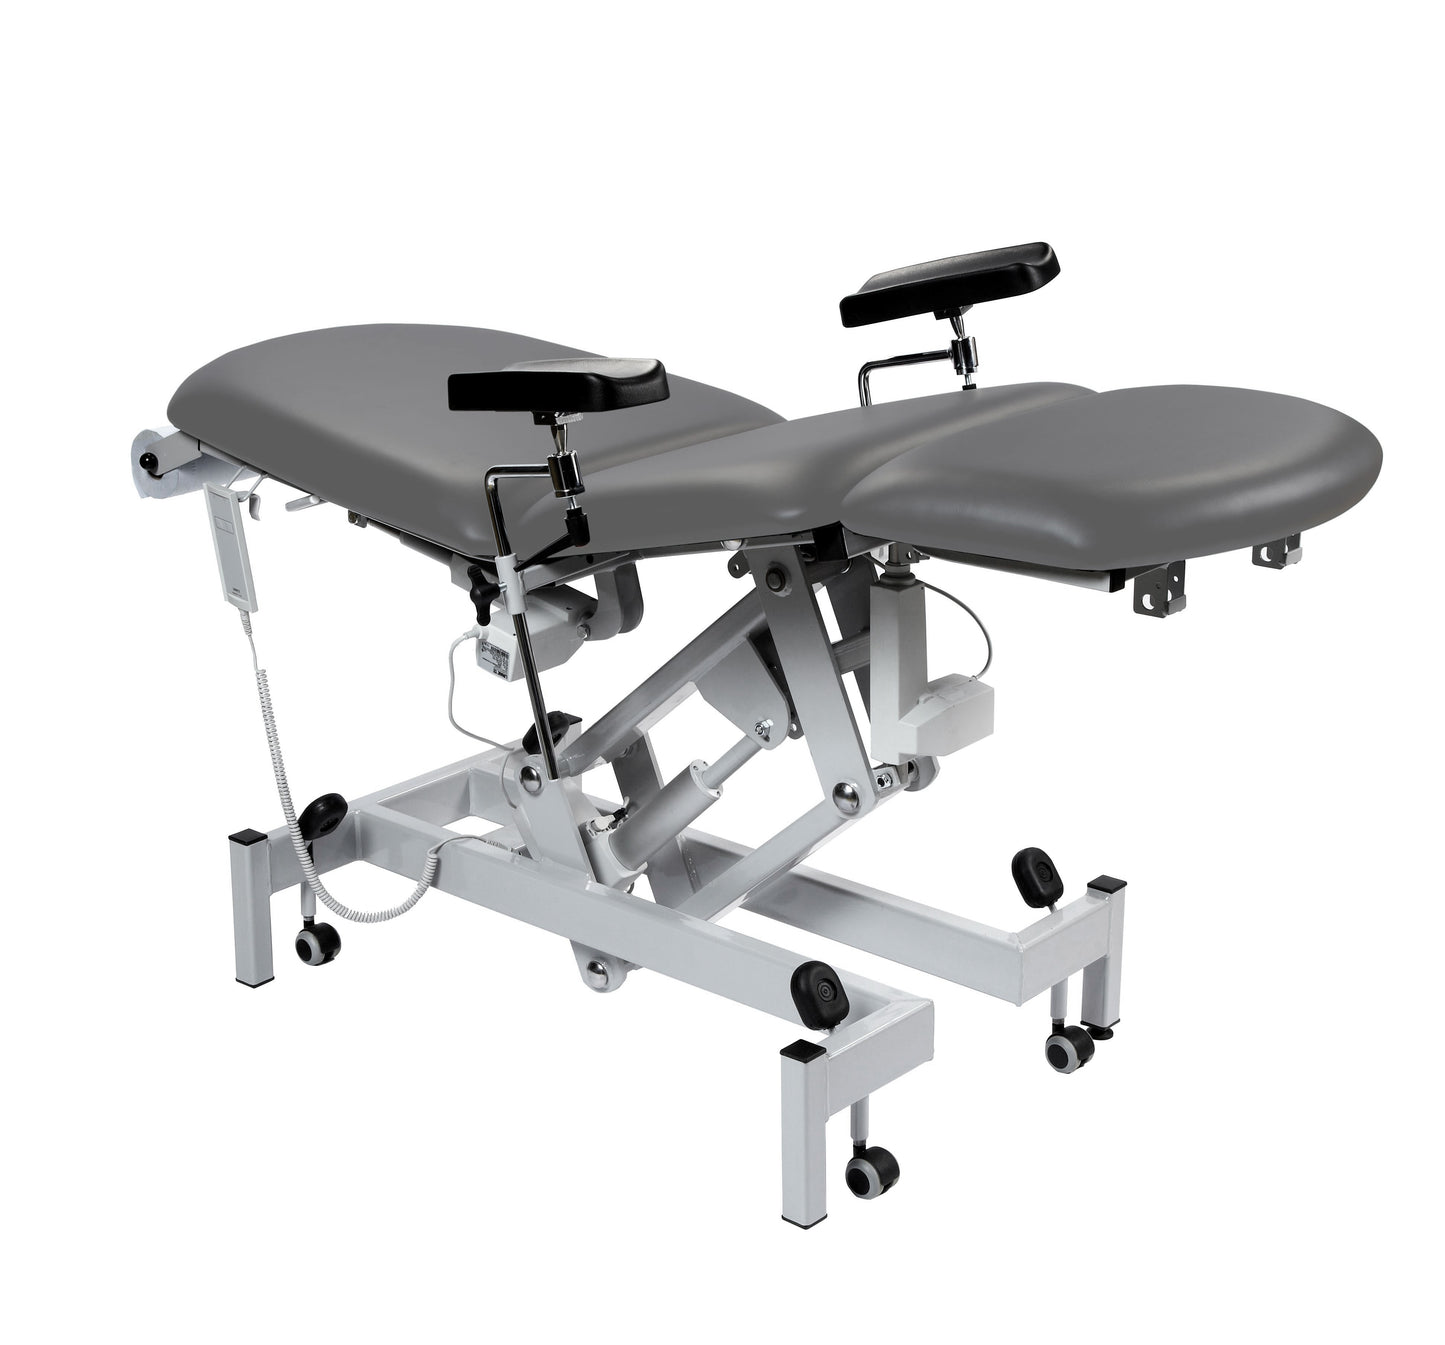 Sunflower - Fusion Phlebotomy Chair with Electric Height Adjustment 3